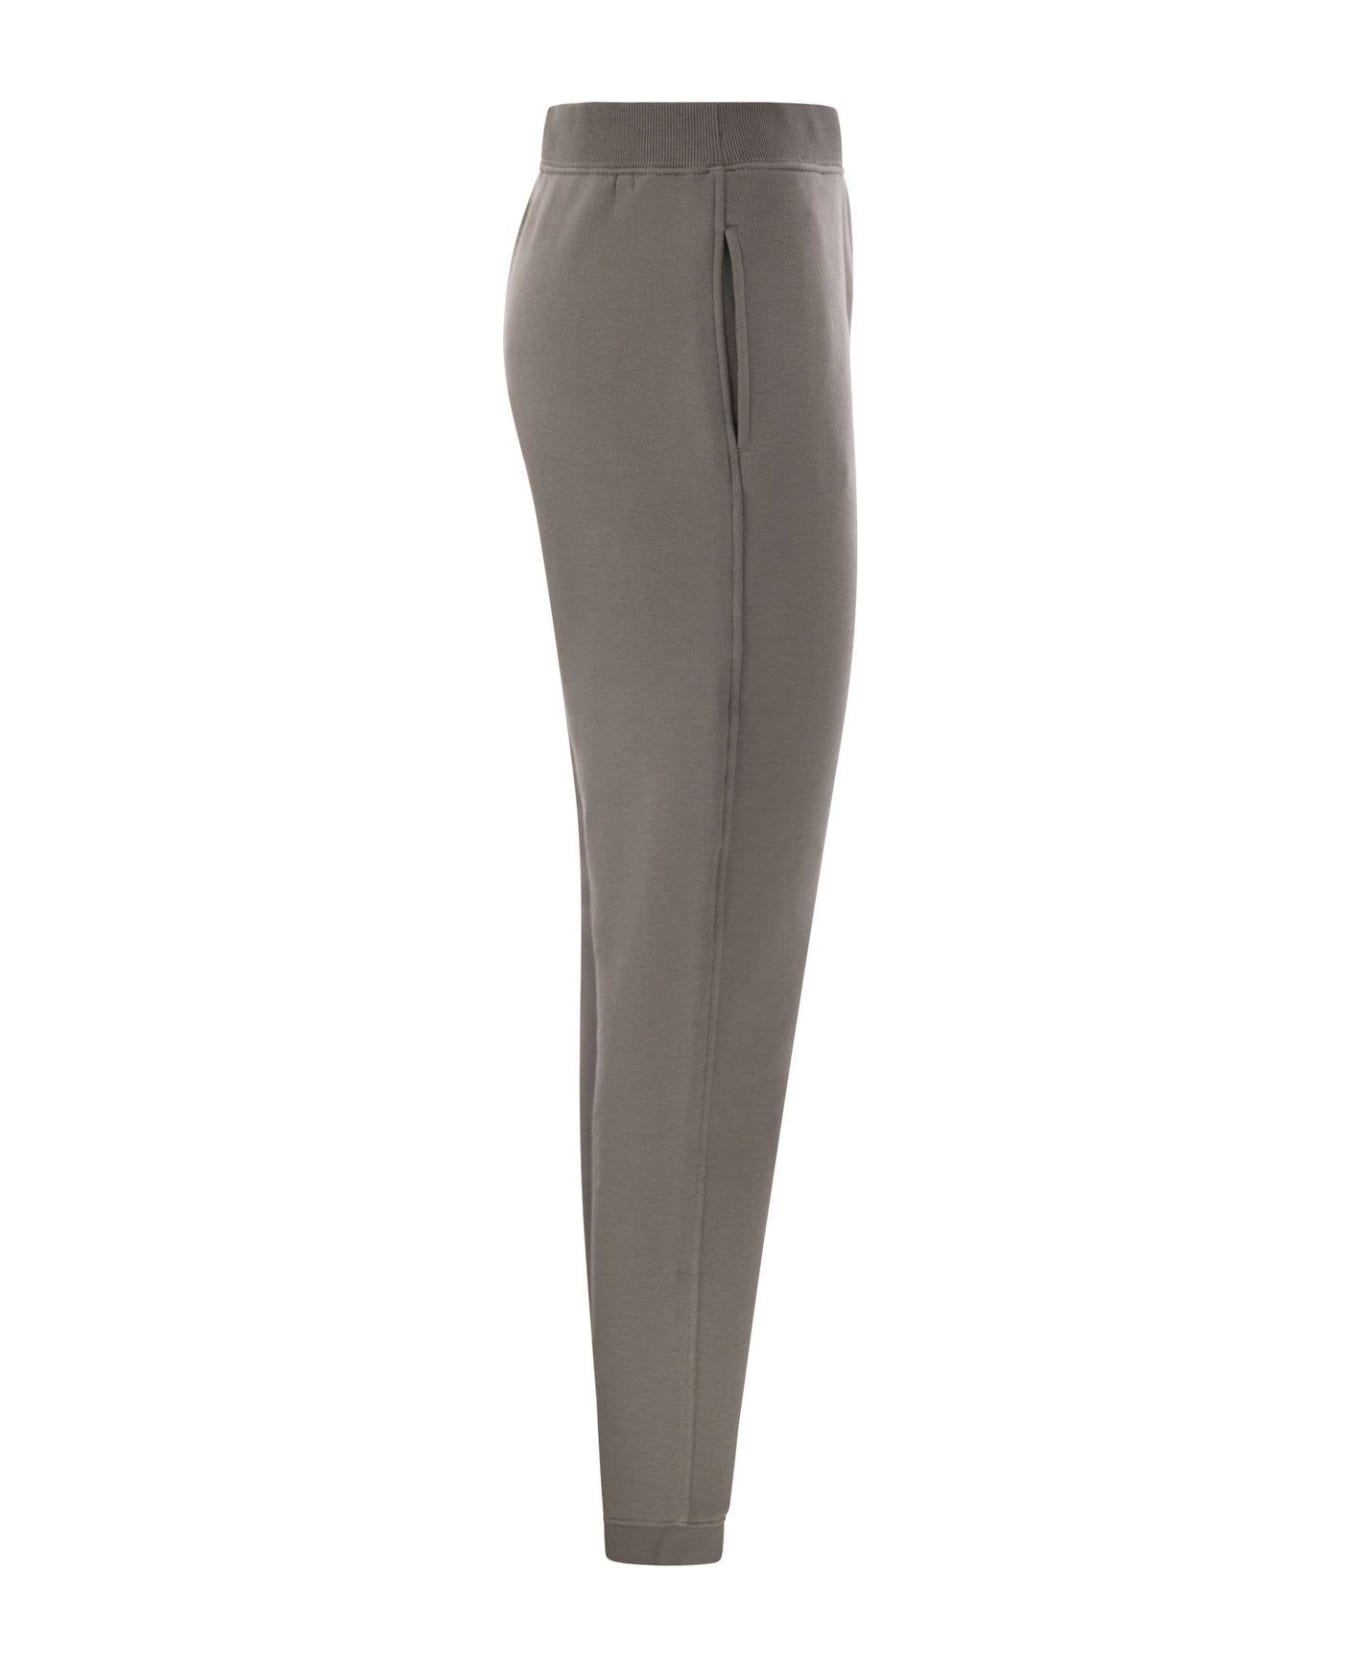 'S Max Mara Logo Embroidered Jogging Trousers - LIGHT GREY